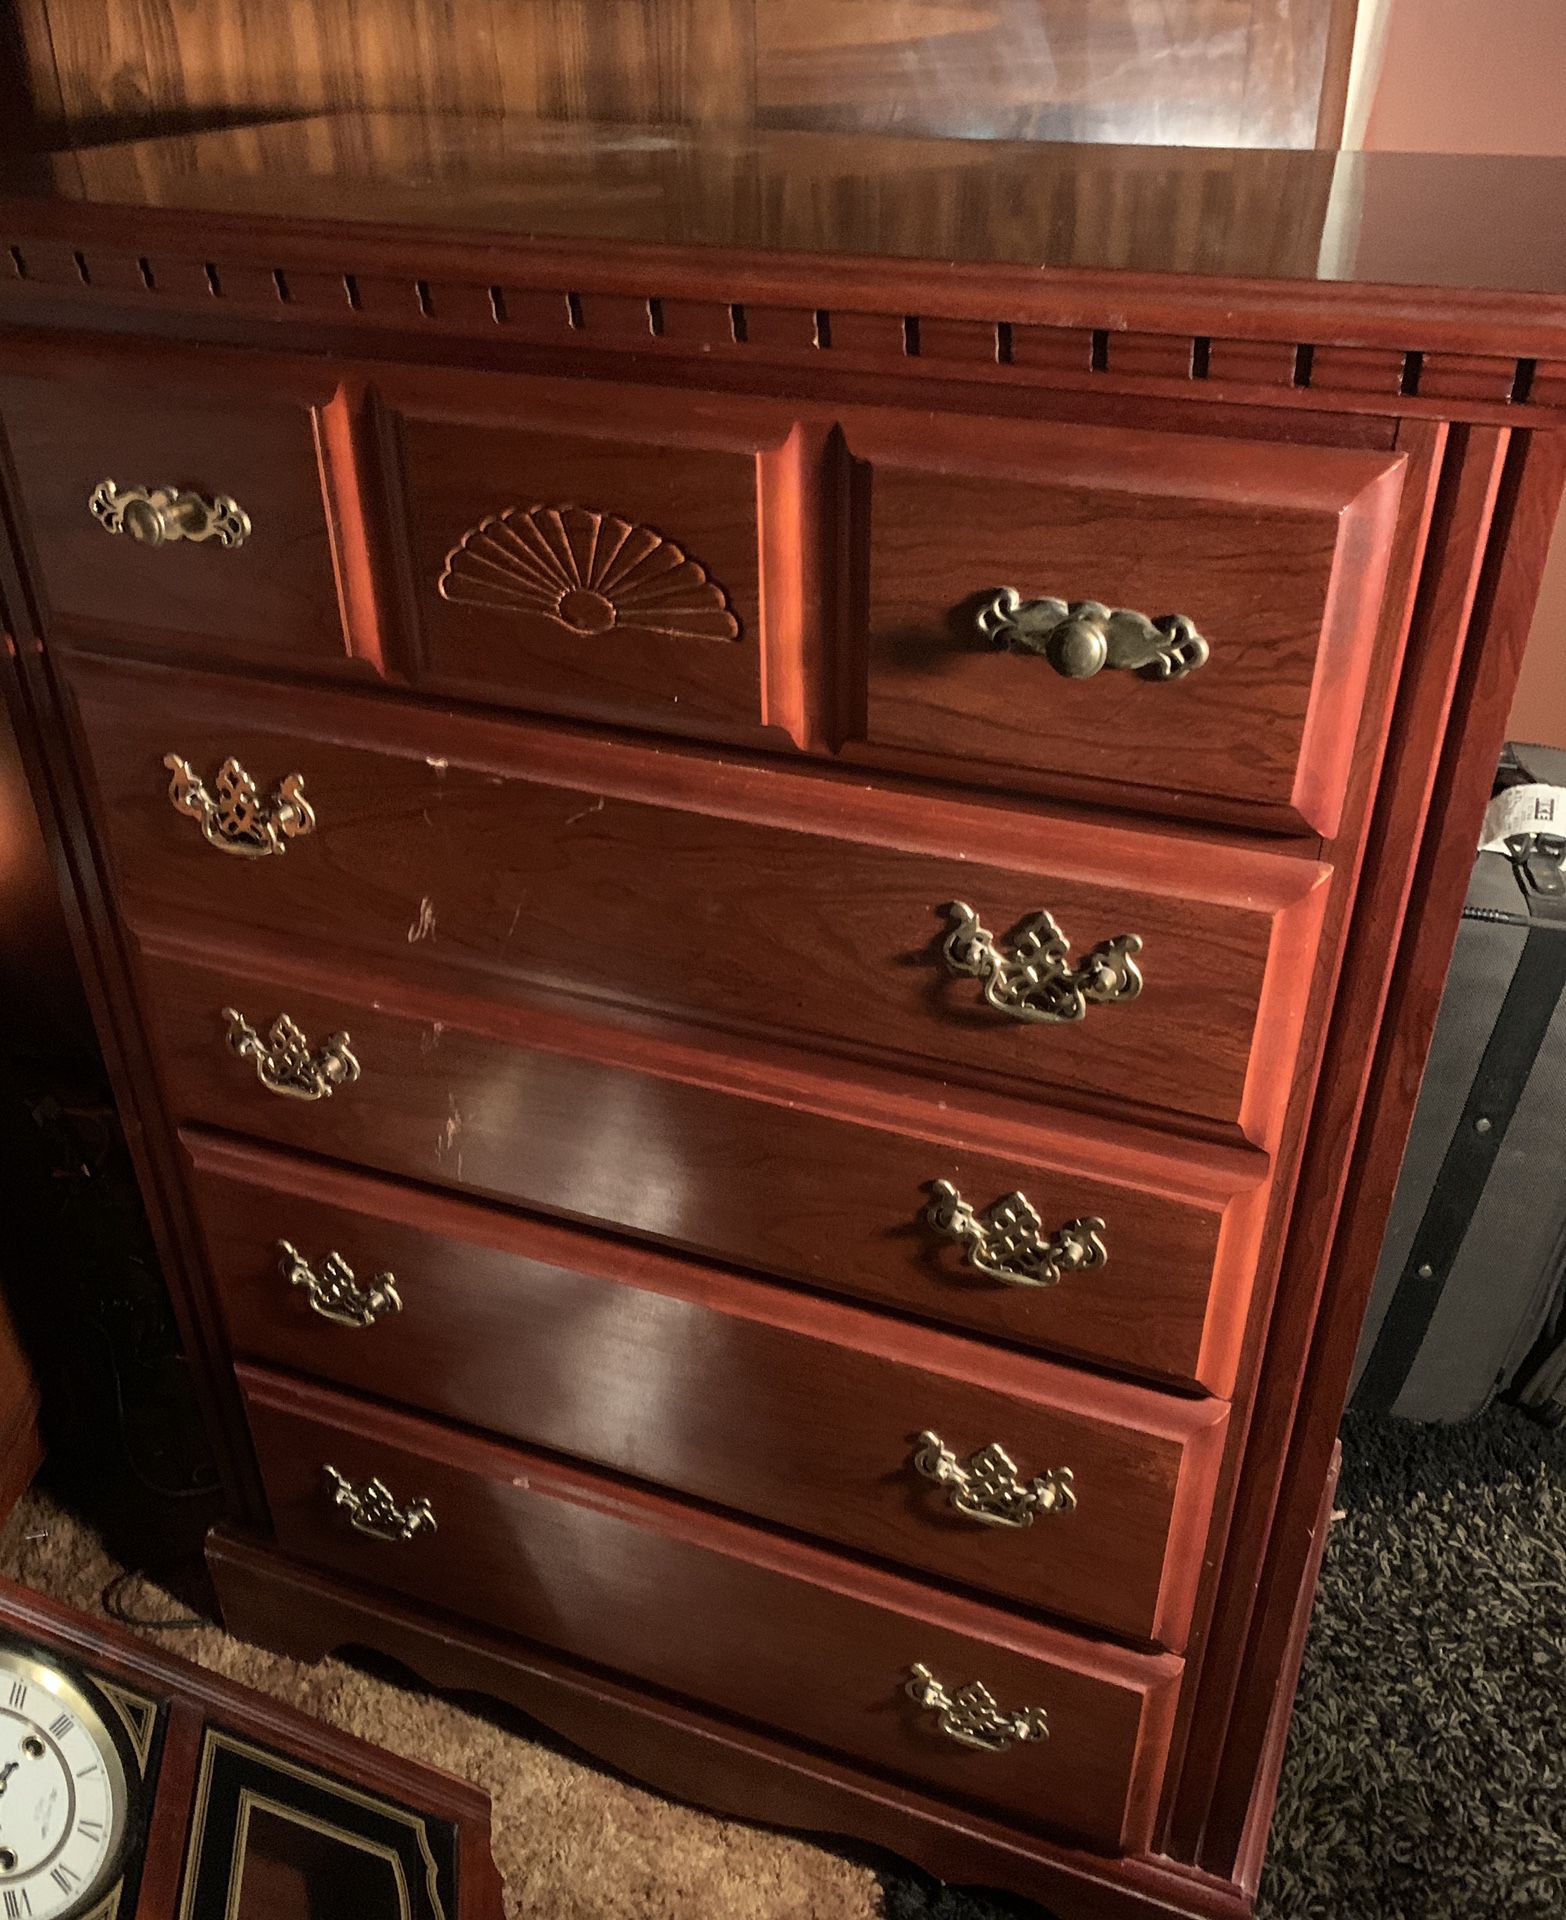 Broyhill dresser used Does has scratches from use on the top front and the sides bring help to load first come first served Needs cleaned/dust/dir